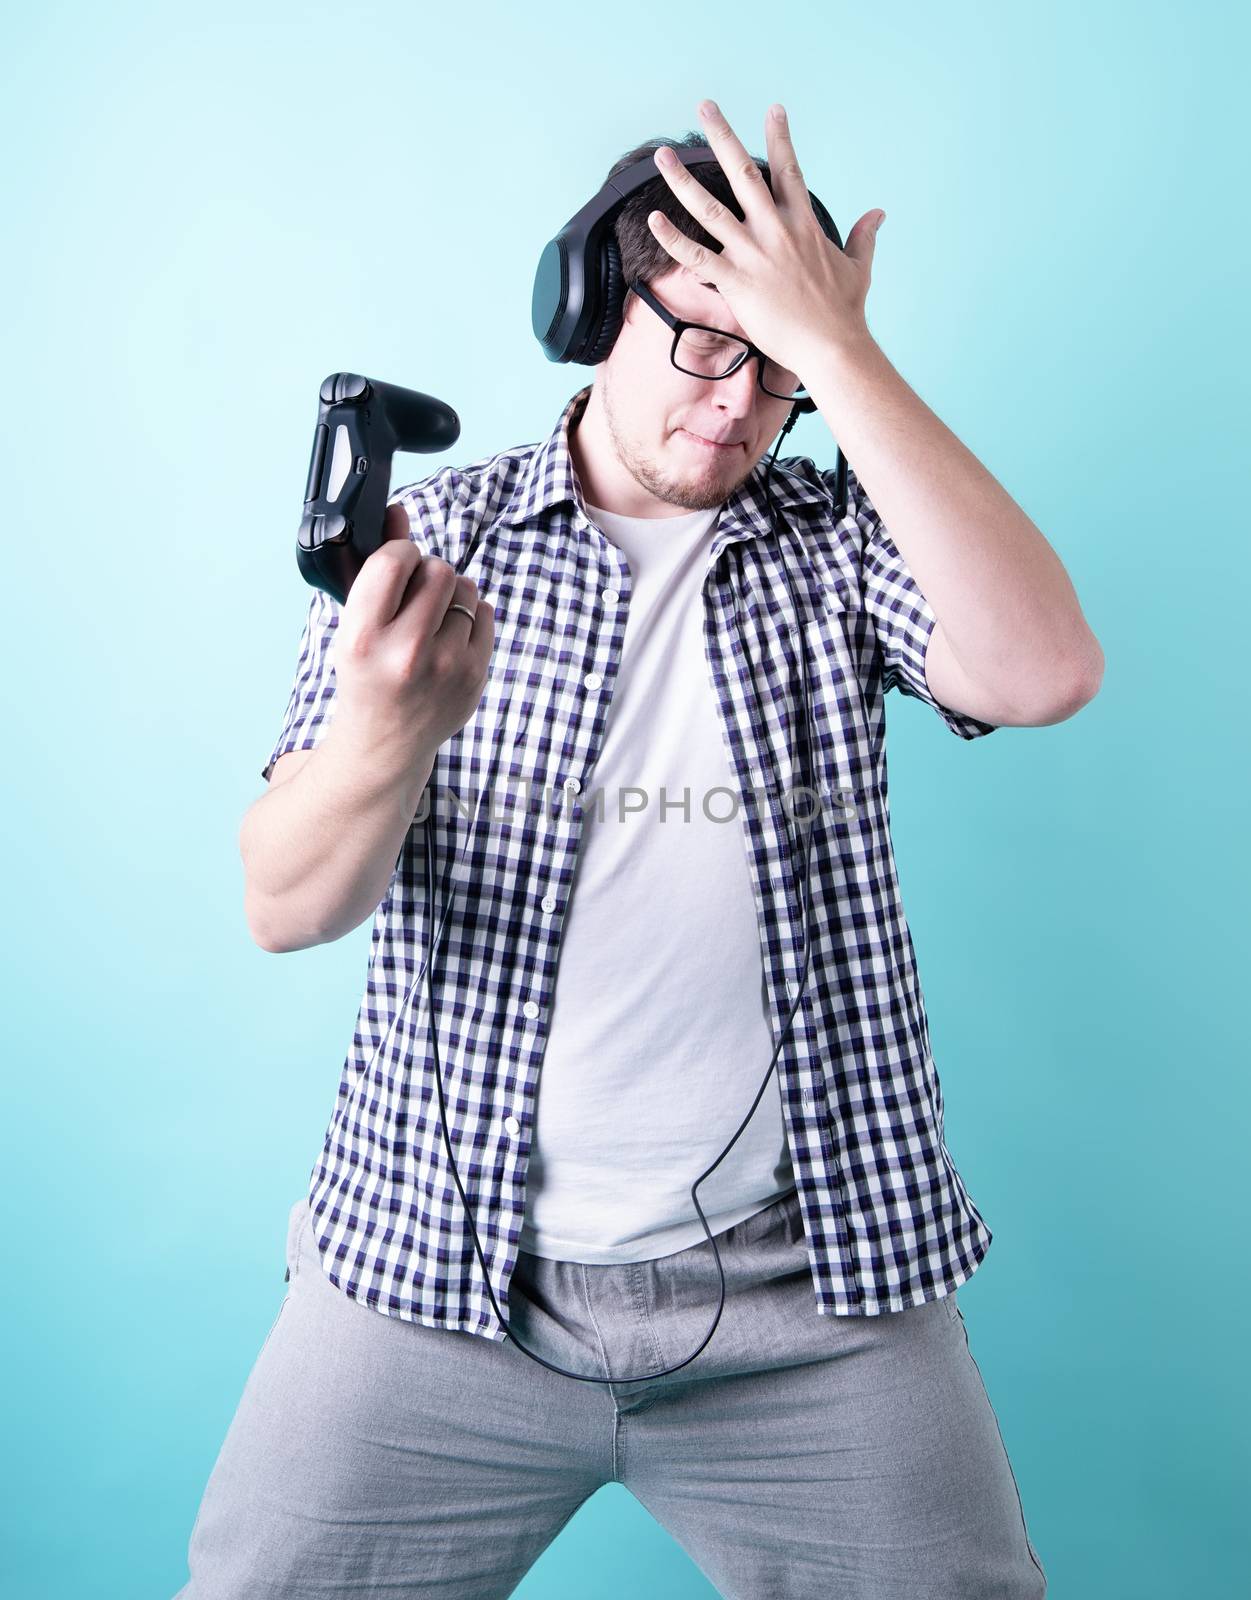 Disappointed young man playing video games holding a joystick isolated on blue background by Desperada